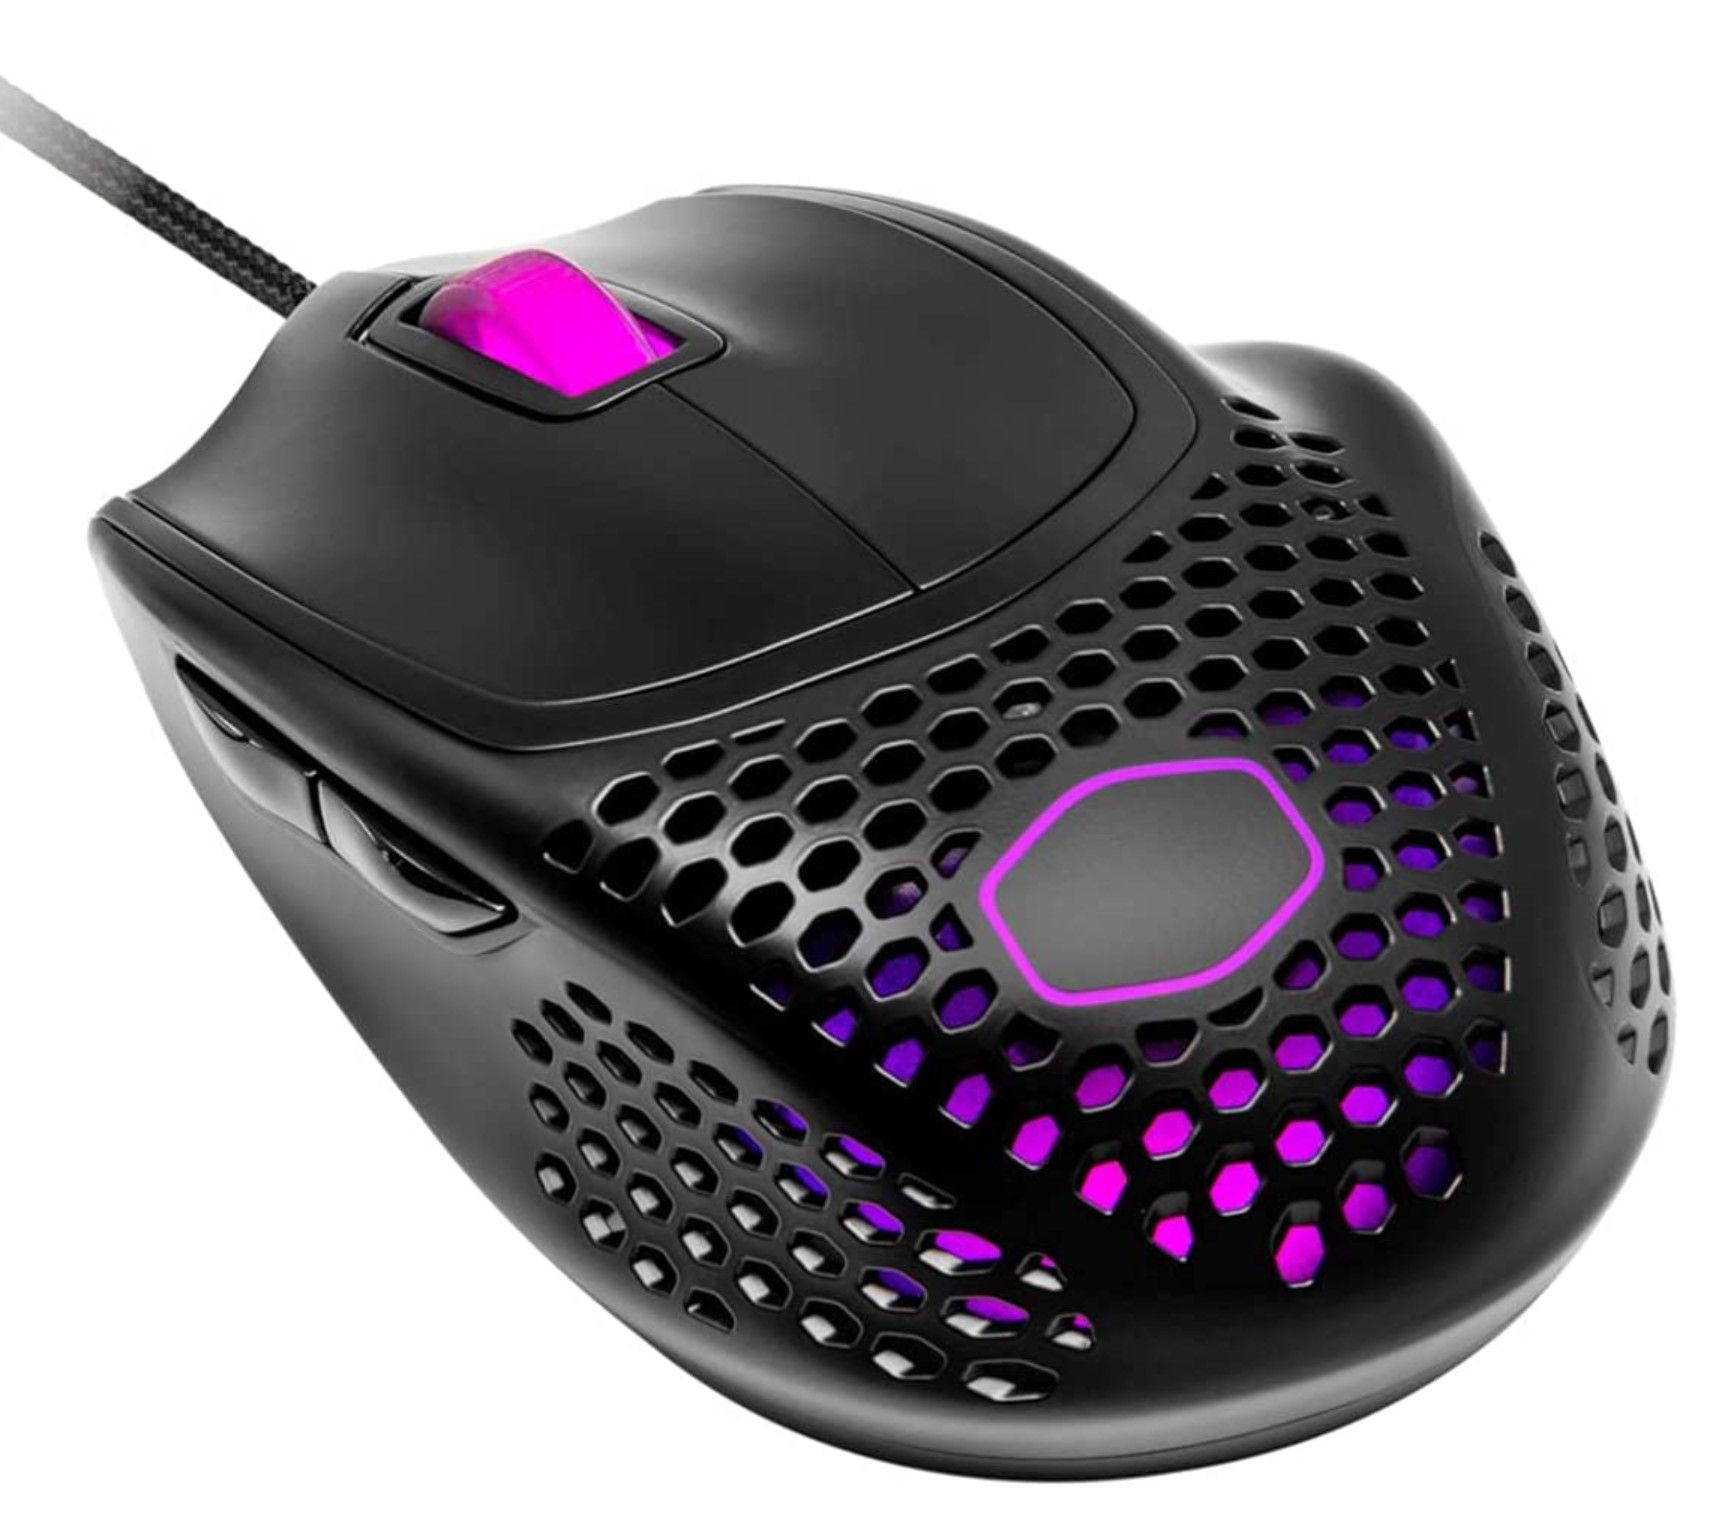 Logitech G302  Best MOBA mouse for only $49 